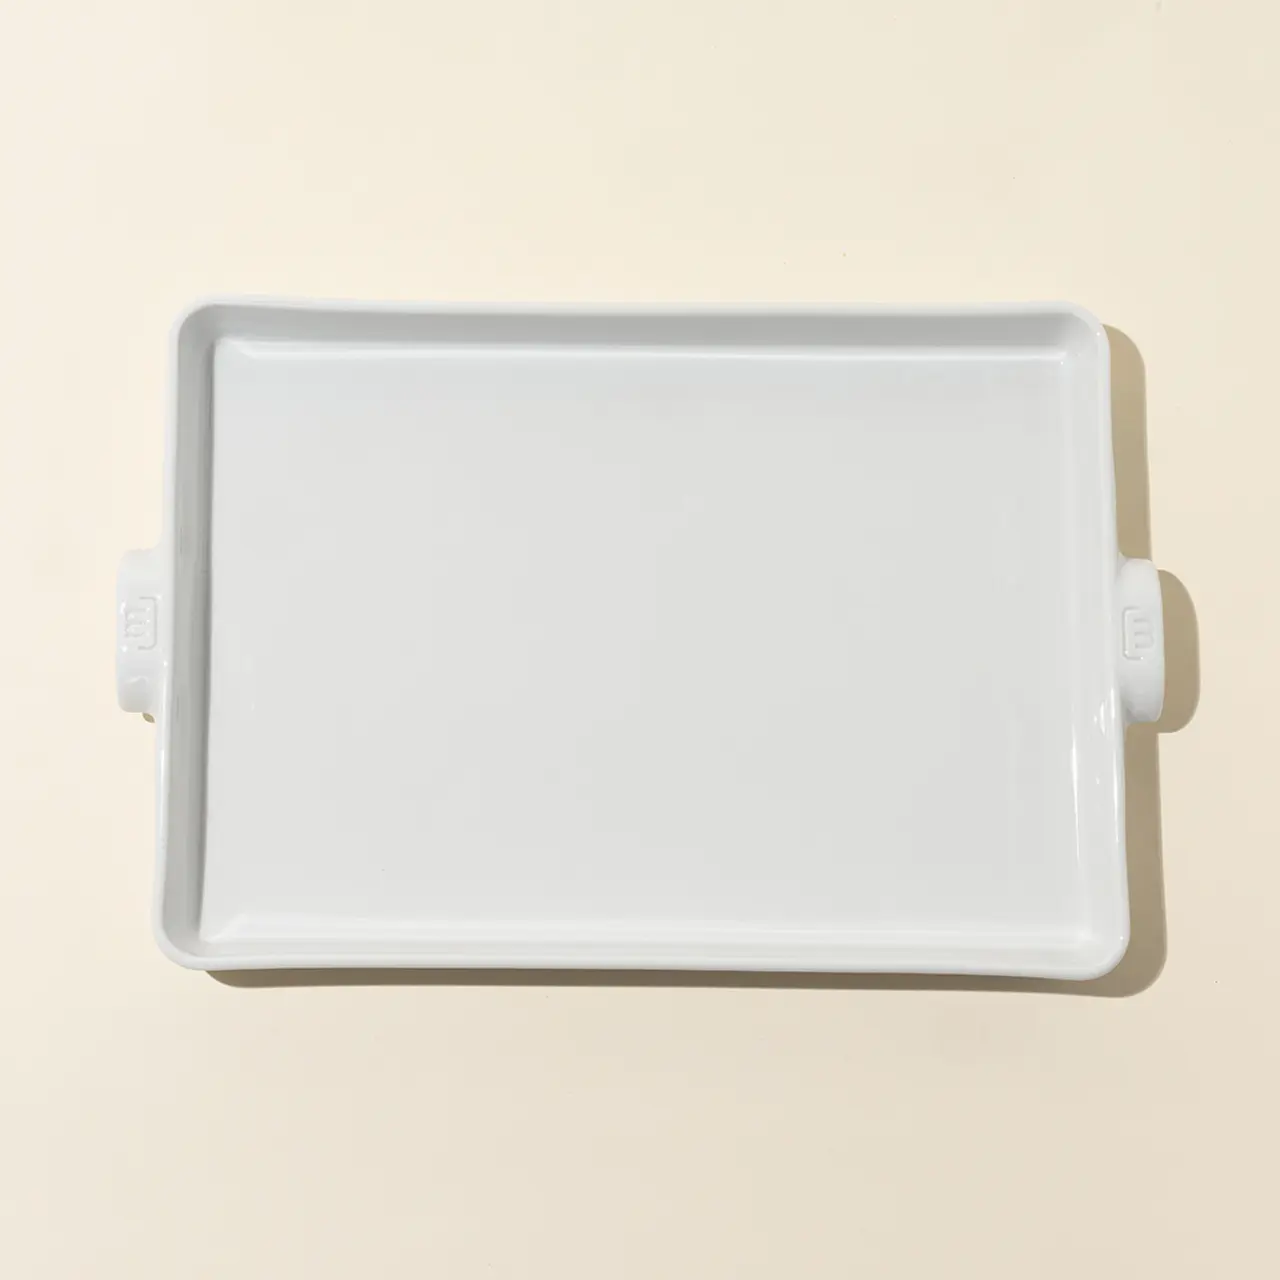 A blank white tray is shown against a neutral background.